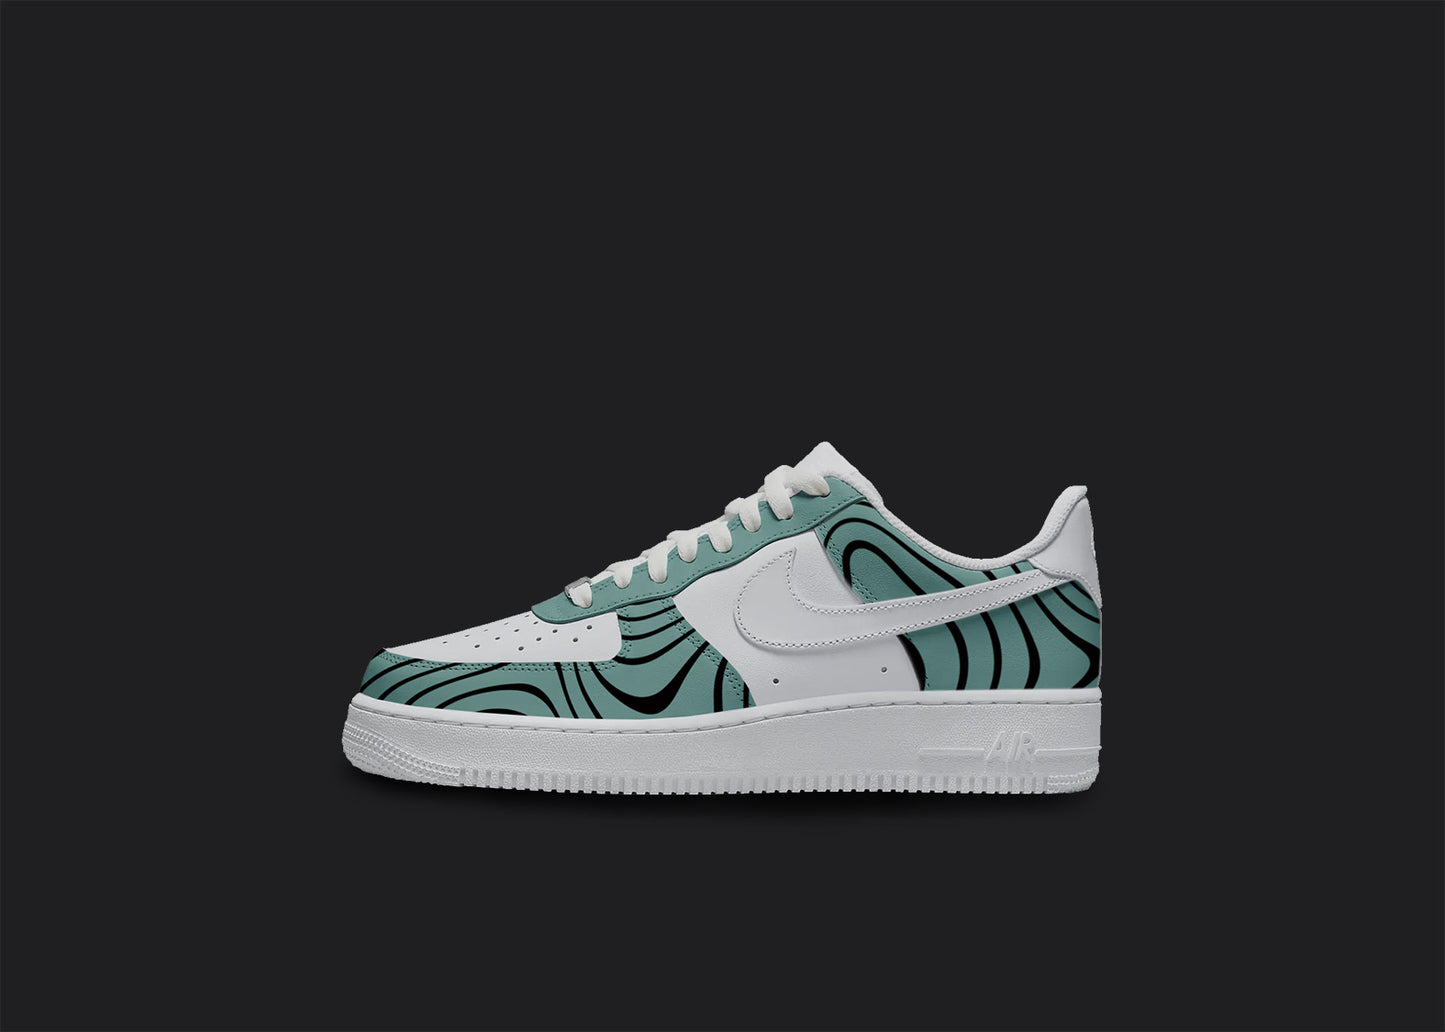 The image is of a Custom Nike Air force 1 sneaker on a blank black background. The white custom sneaker has all over Green Stripes design.